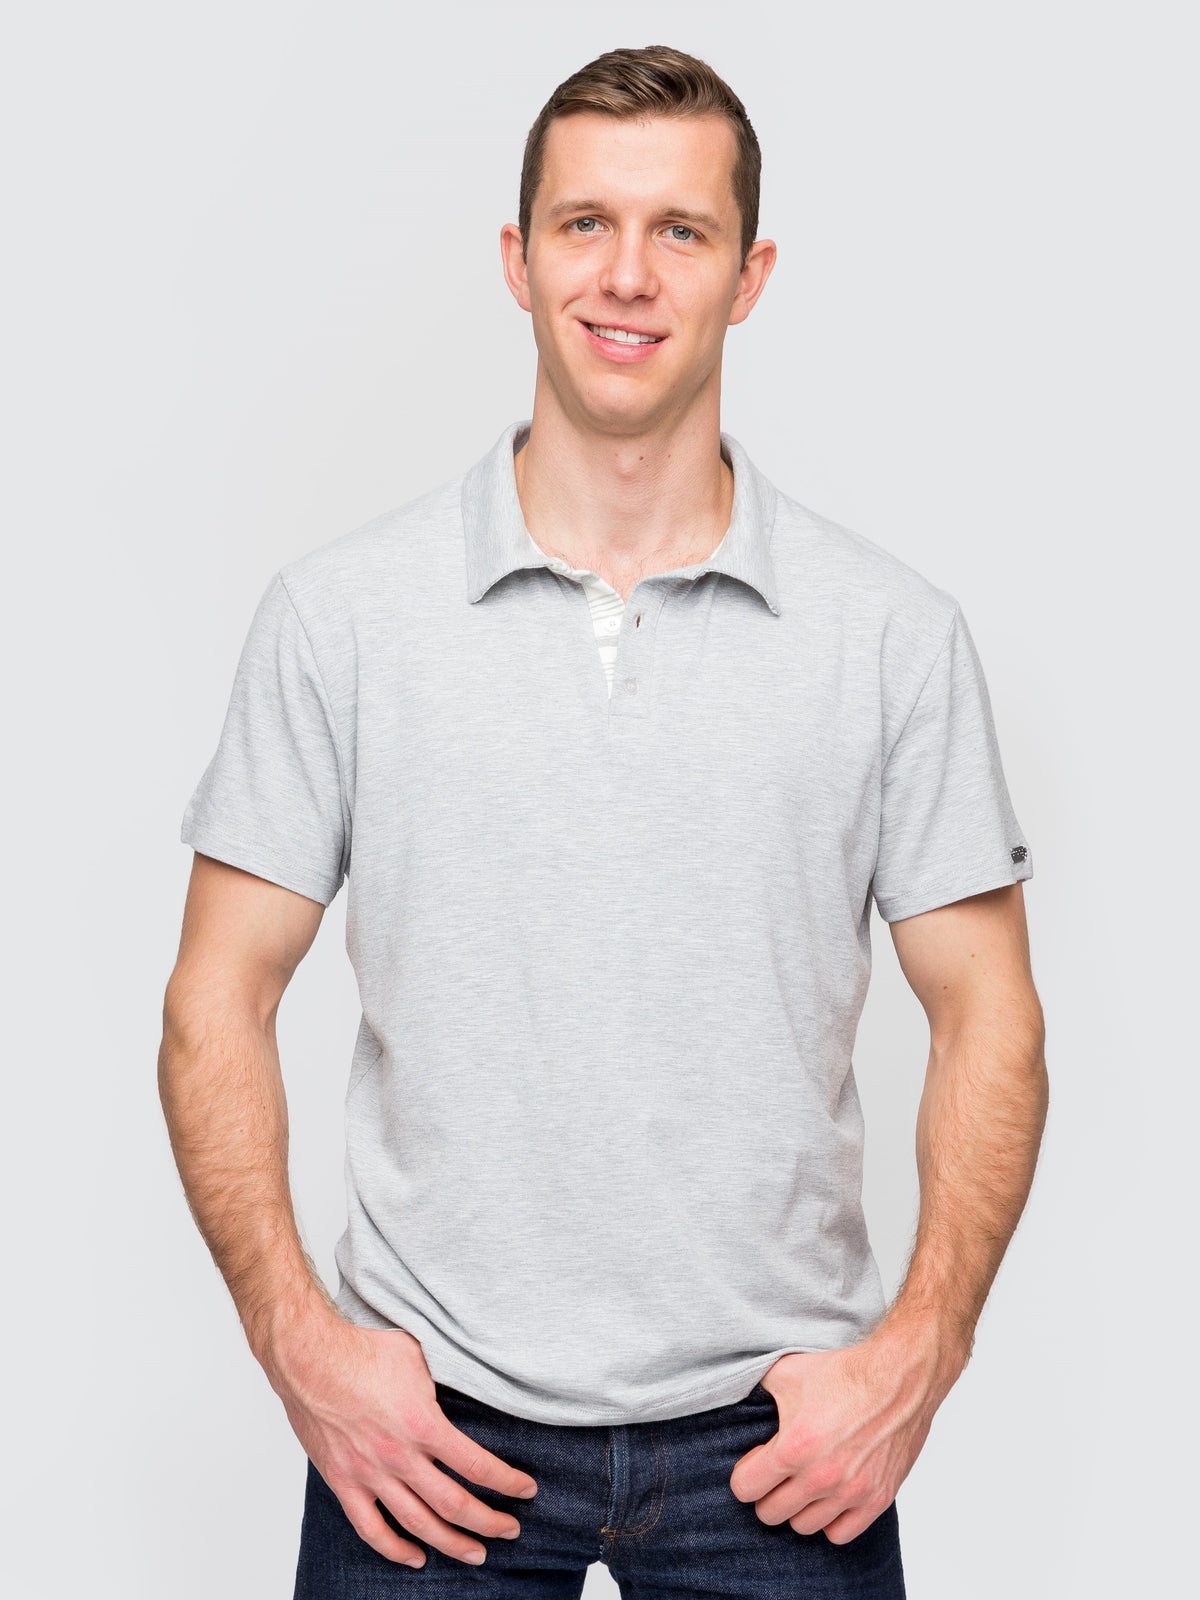 Two Blind Brothers - Mens Men's Short Sleeve Polo Navy